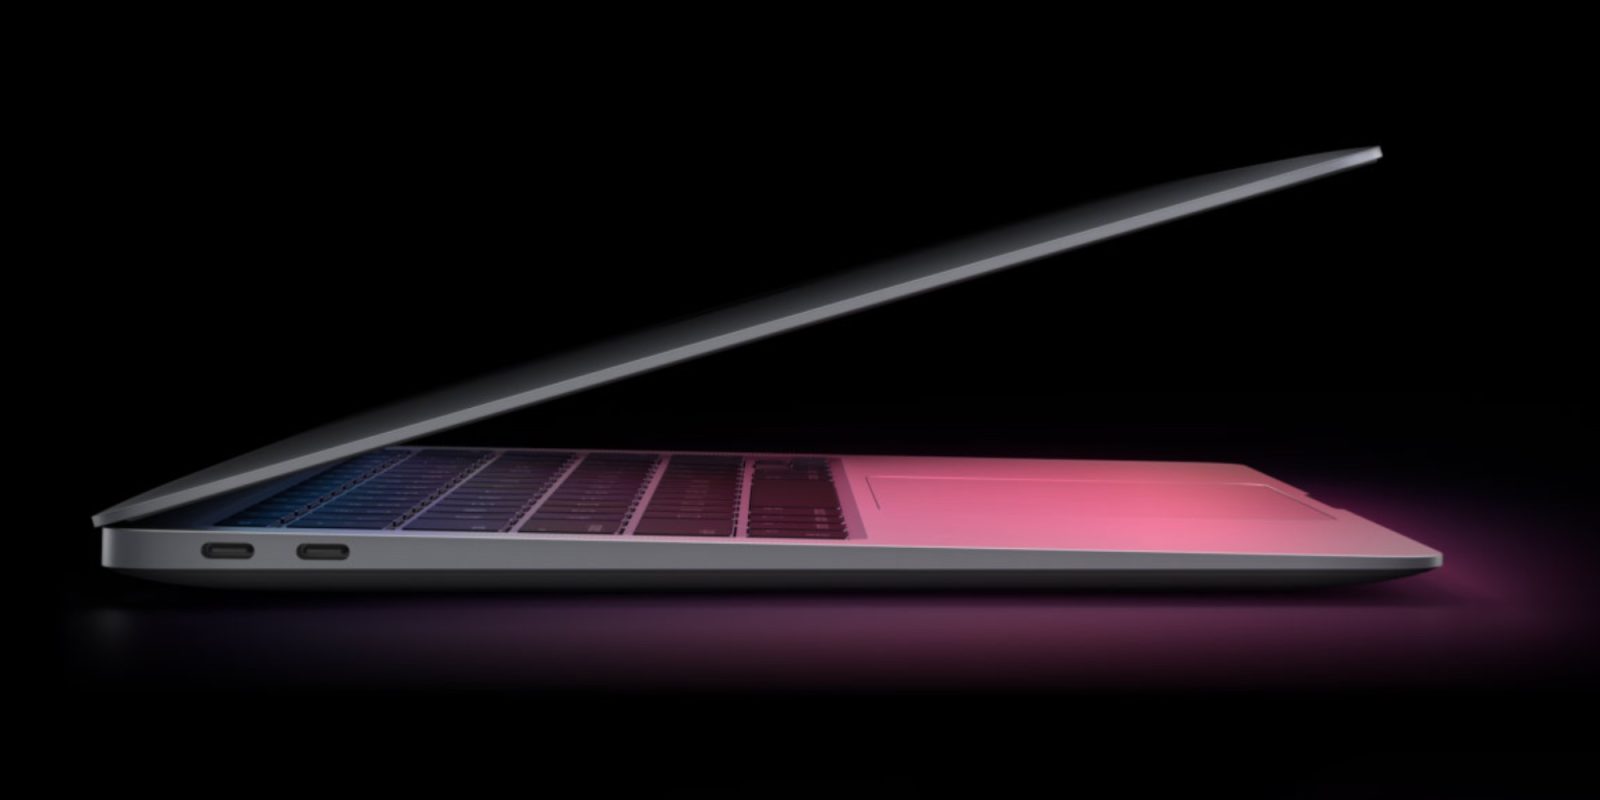 Kuo: Apple to Announce New MacBook Air With 13-inch Mini-LED Display in Mid-2022